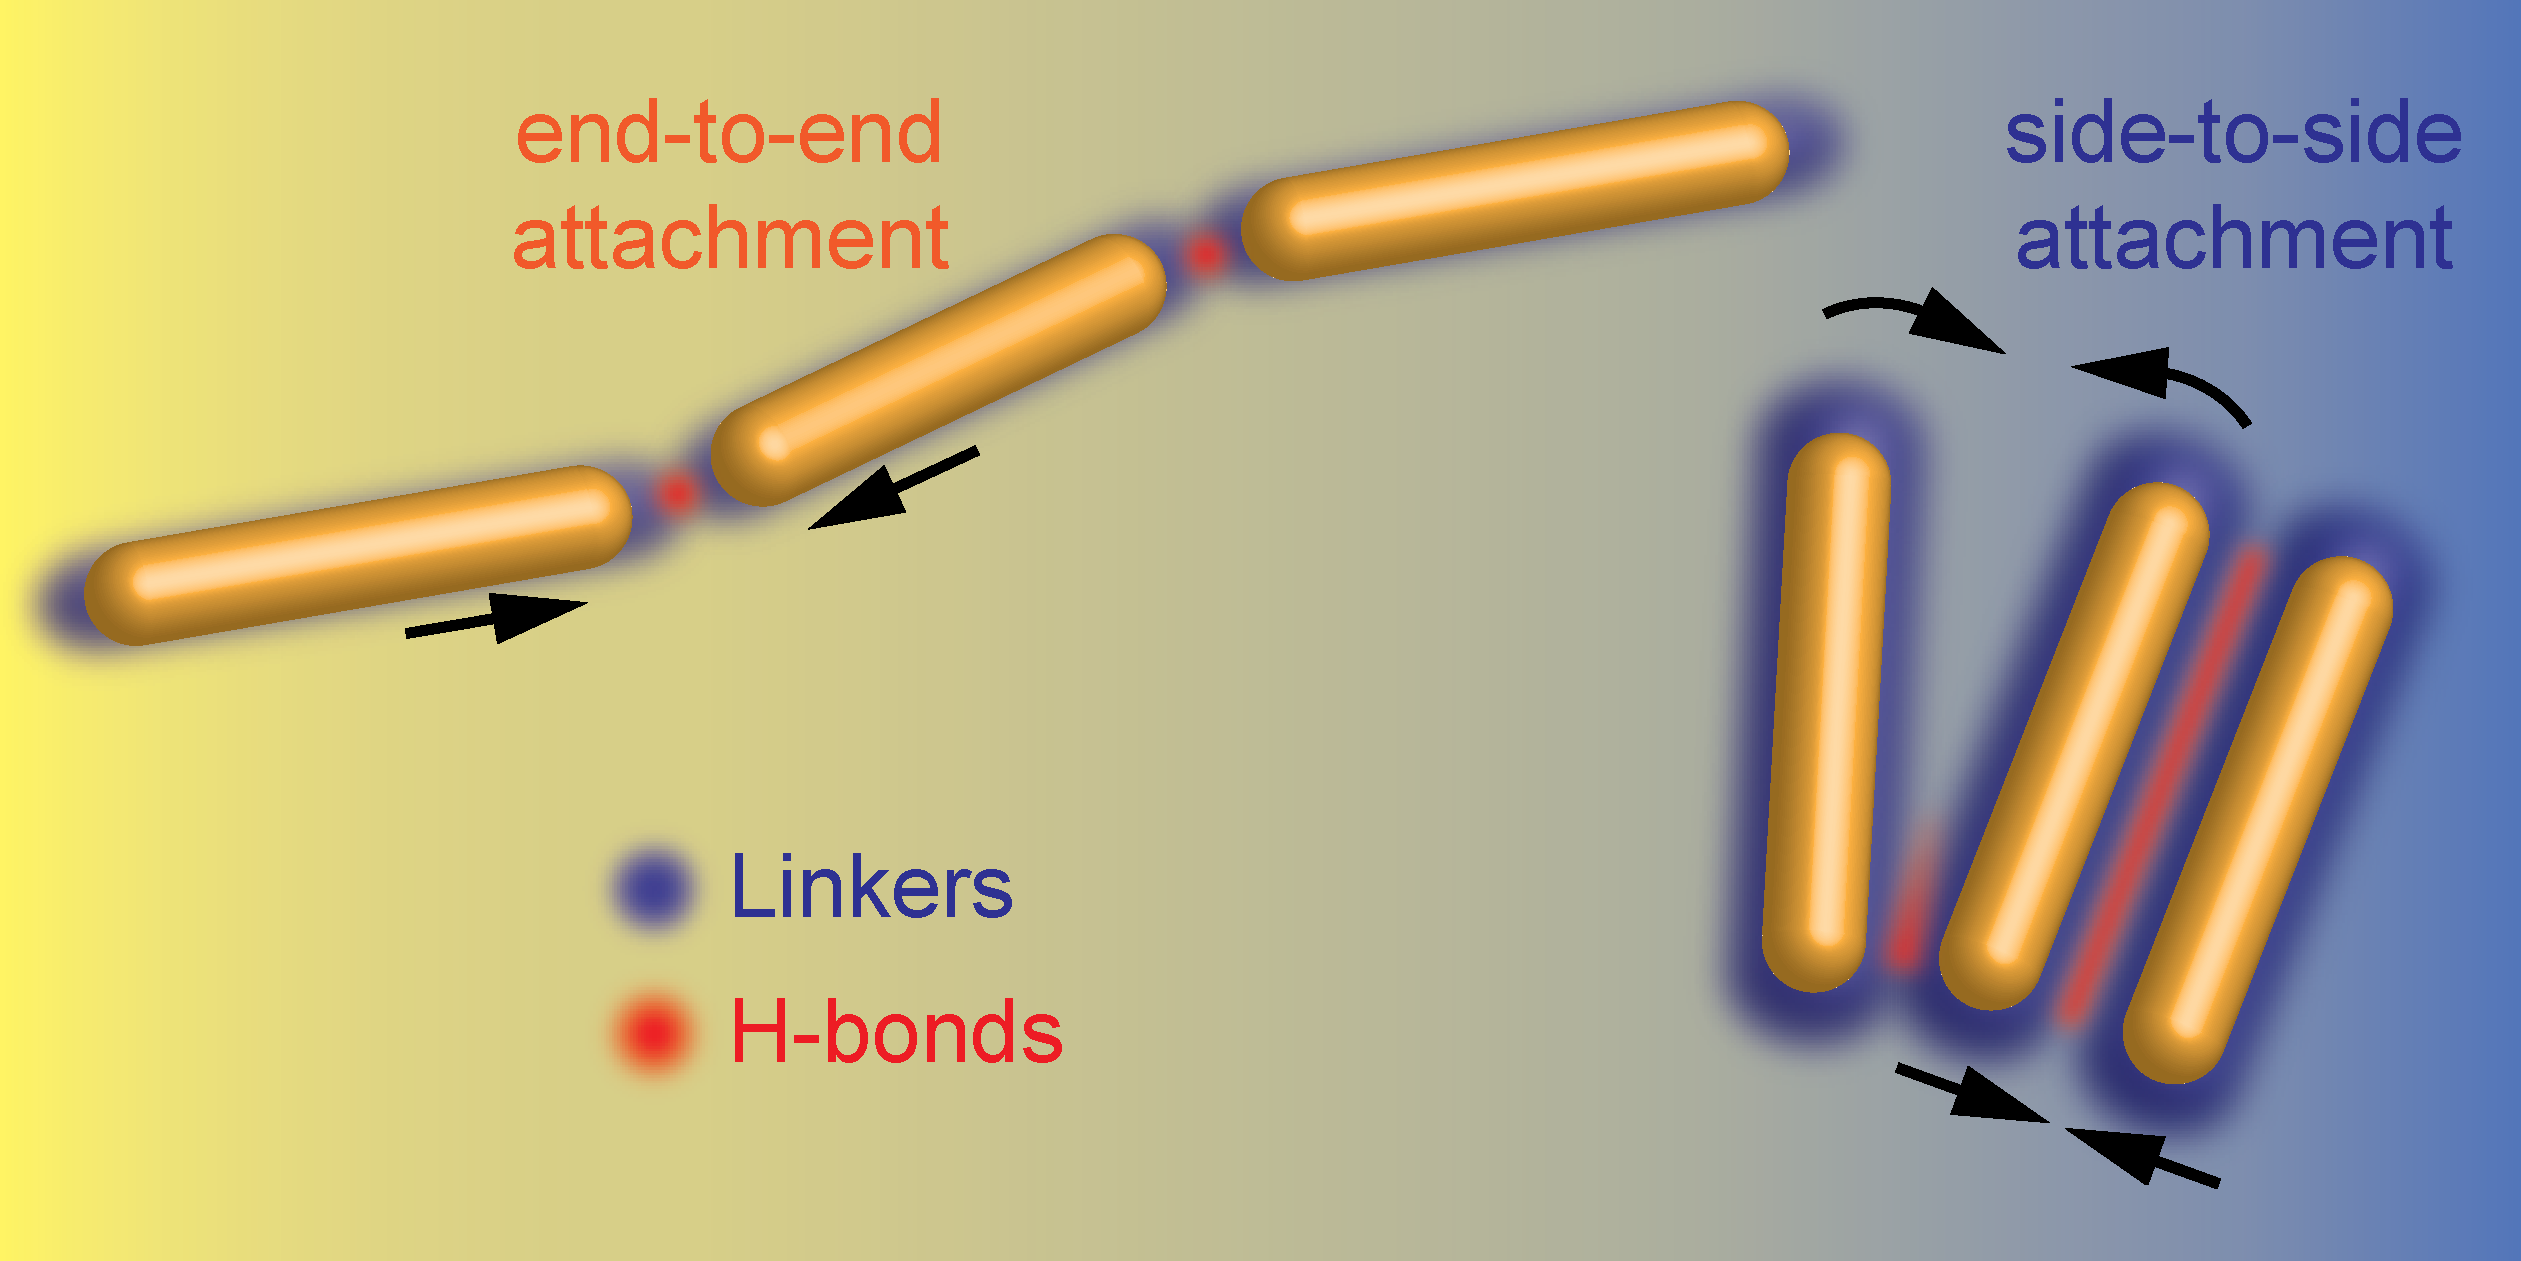 INTERACTIONS AND ATTACHMENT PATHWAYS BETWEEN FUNCTIONALIZED GOLD NANORODS